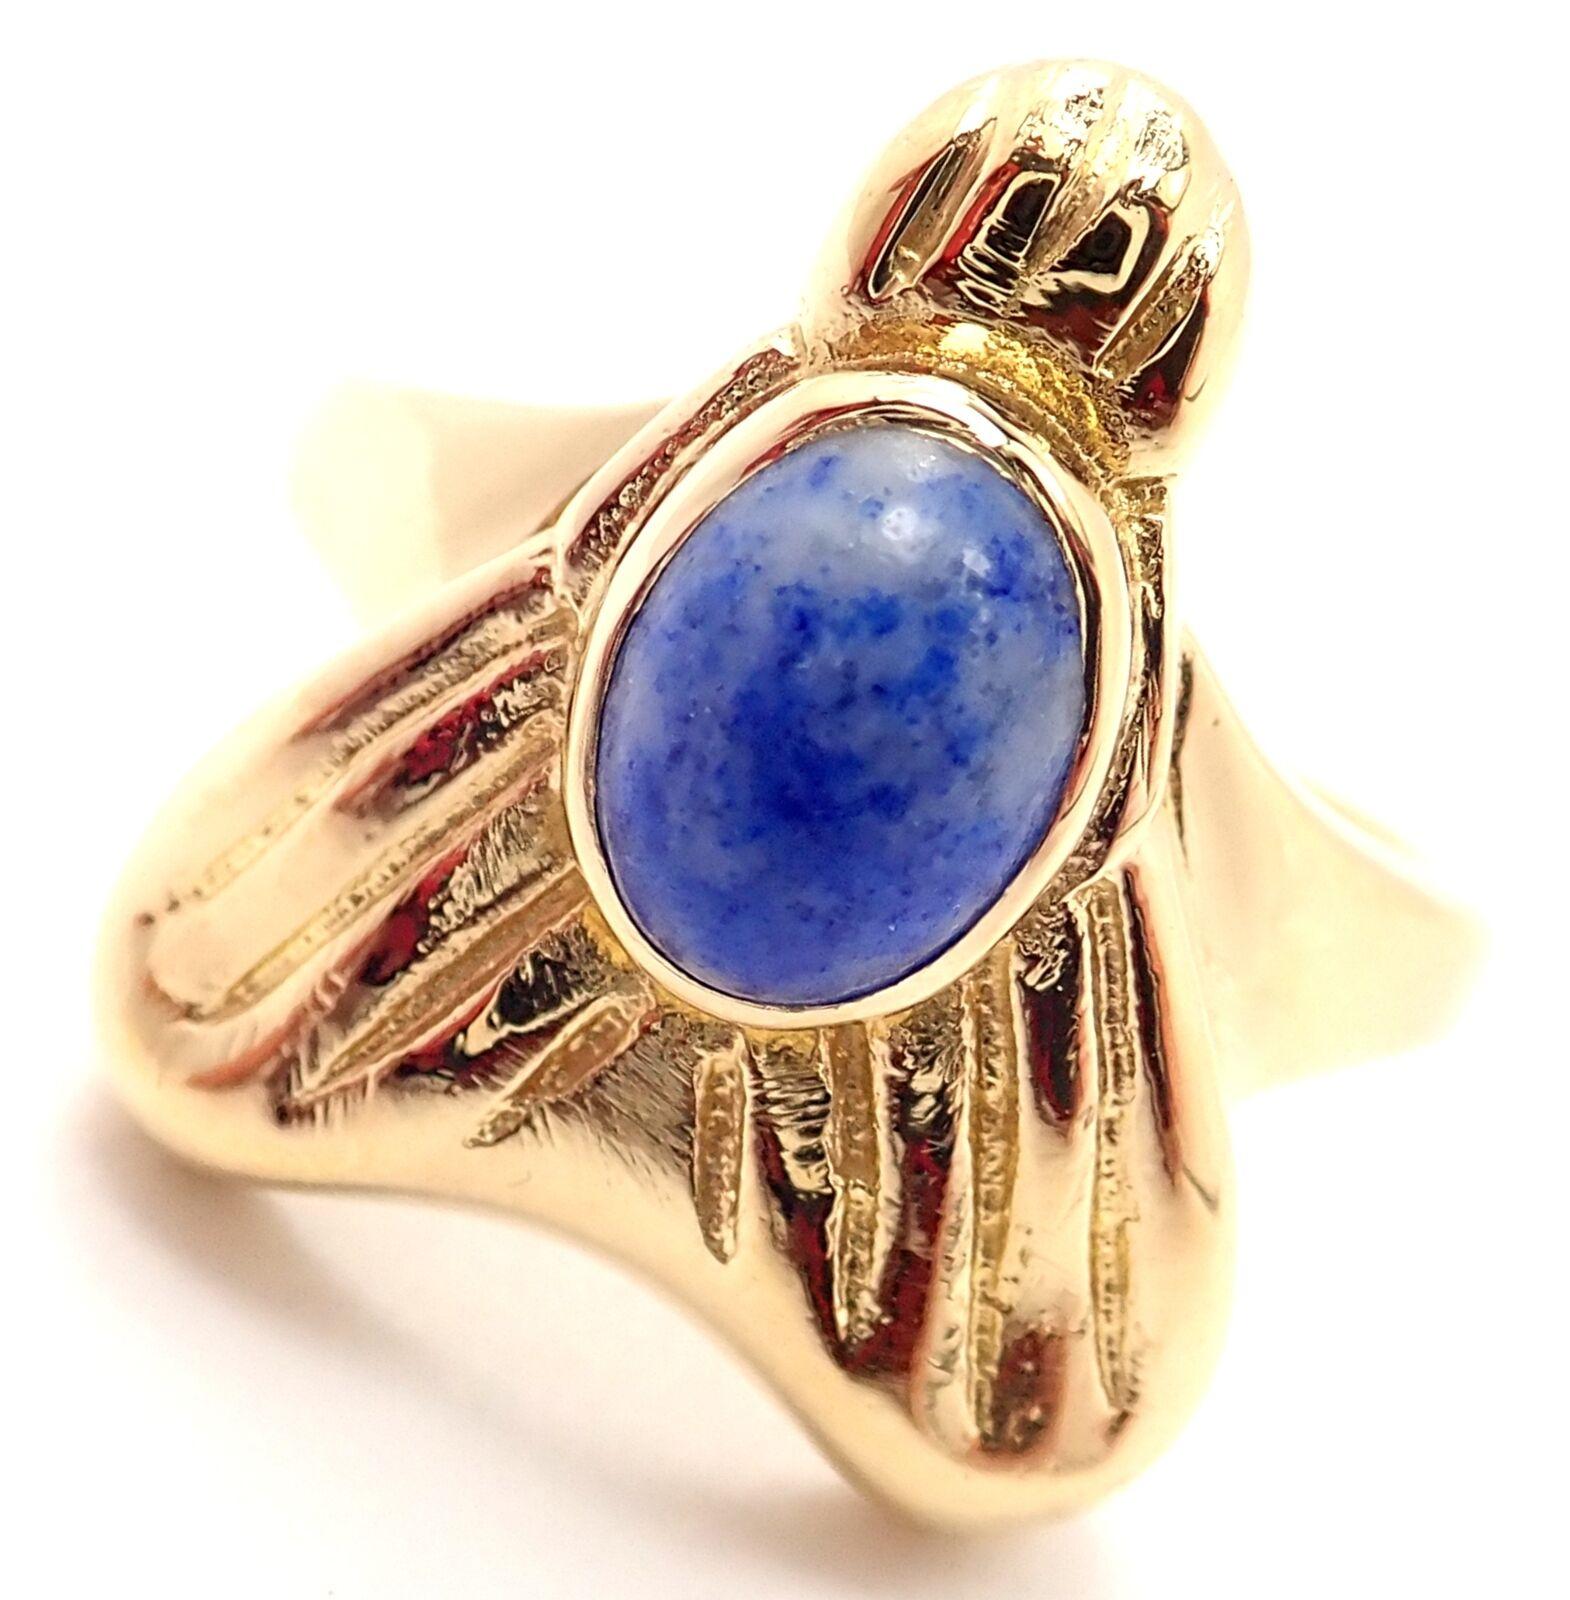 18k Yellow Gold Vintage Sodalite Ring By Ilias Lalaounis.
With Sodalite stone 8mmx7mm
Details: 
Ring Size: 7.5
Width: 20mm
Weight: 7.6 grams
Stamped Hallmarks: Lalaounis Logo, Greece 750, A21
*Free Shipping within the United States
YOUR PRICE: